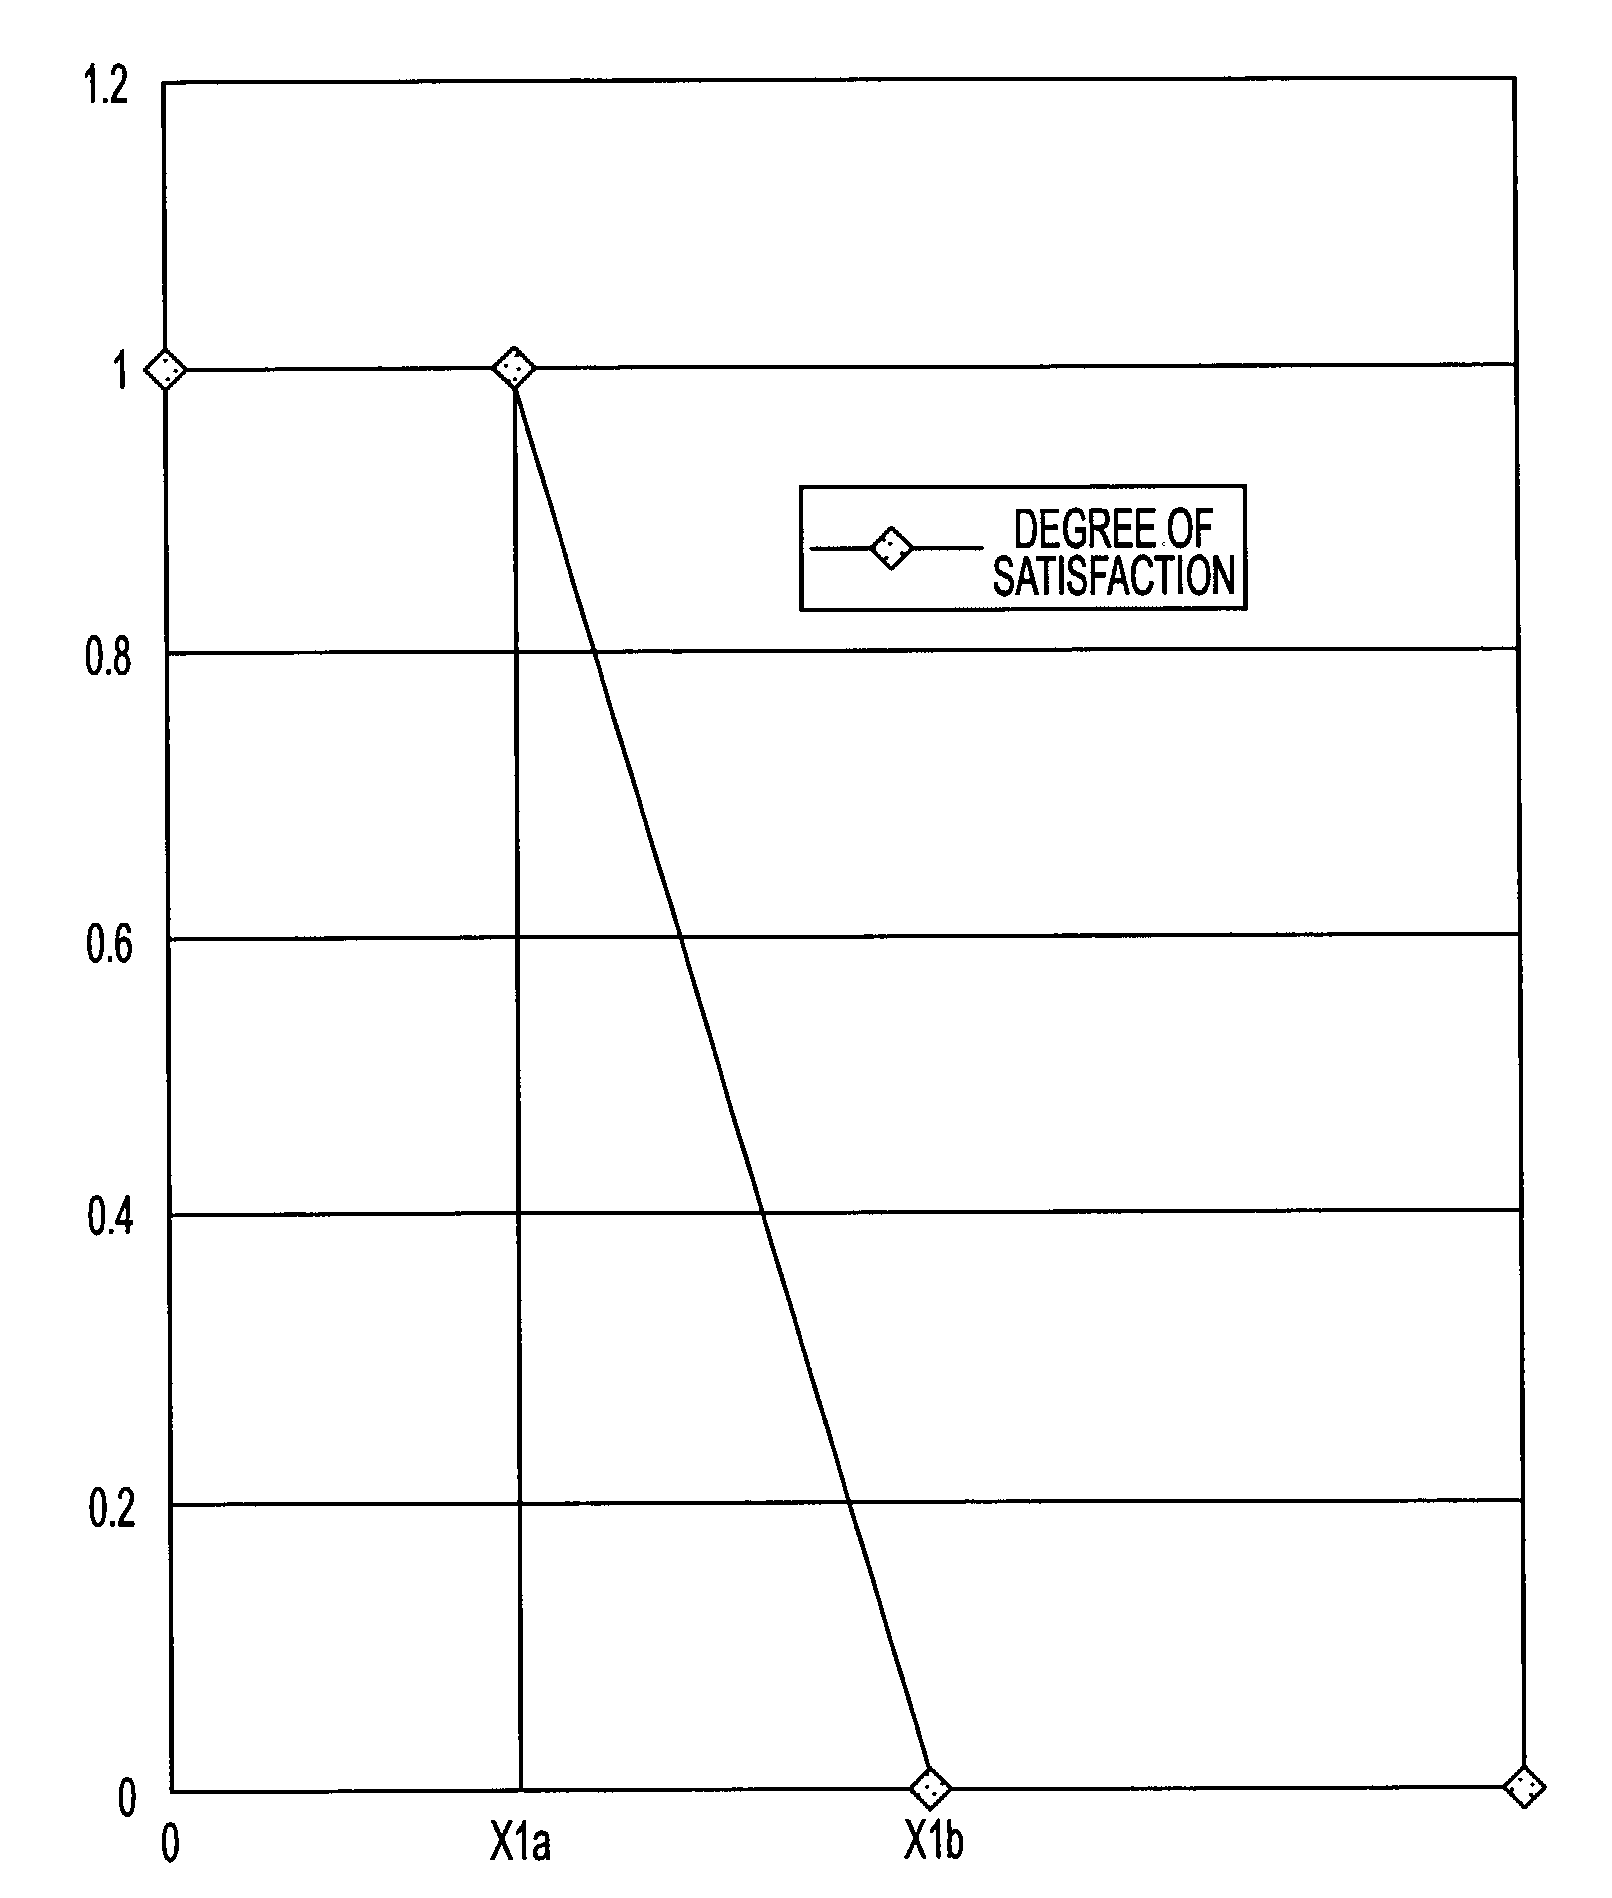 System for determining a confidence factor for insurance underwriting suitable for use by an automated system